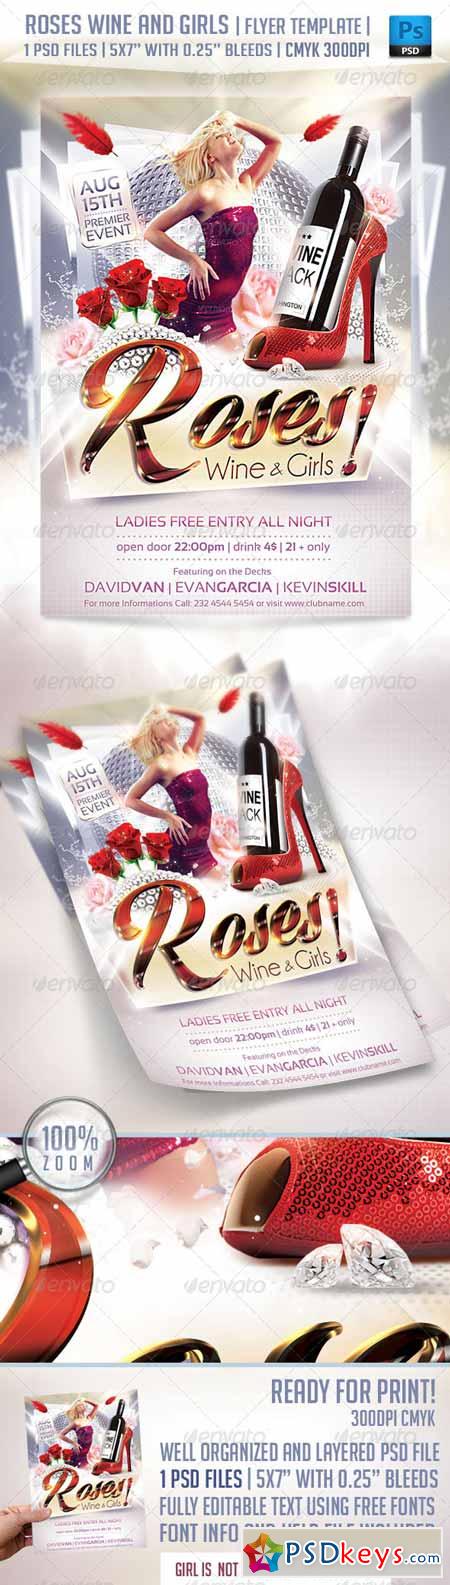 Roses Wine and Girls Flyer Template 4941780